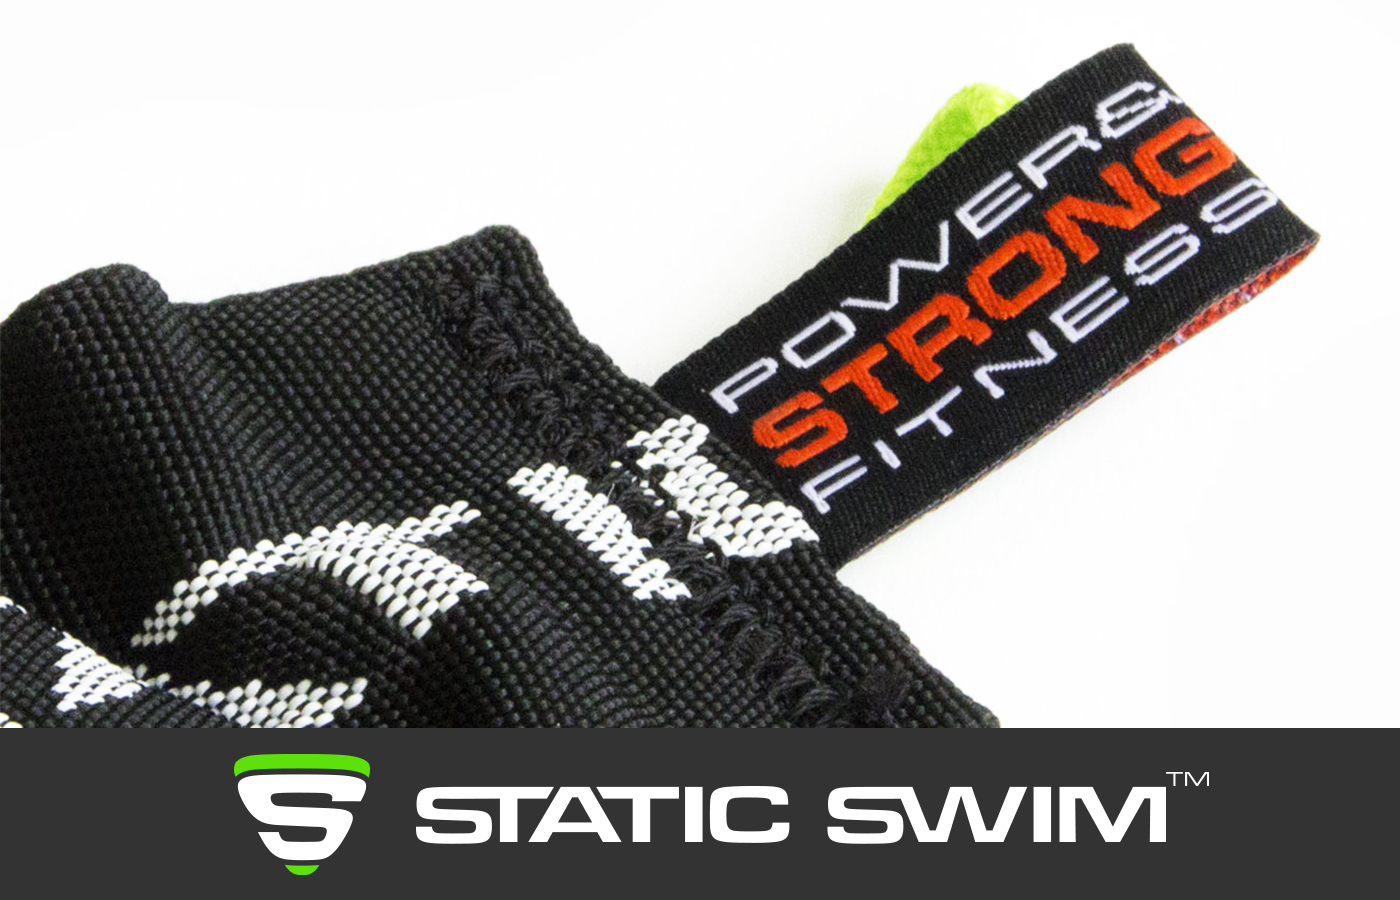 Swim Tether - Water Resistance Band - STRONG - Close up